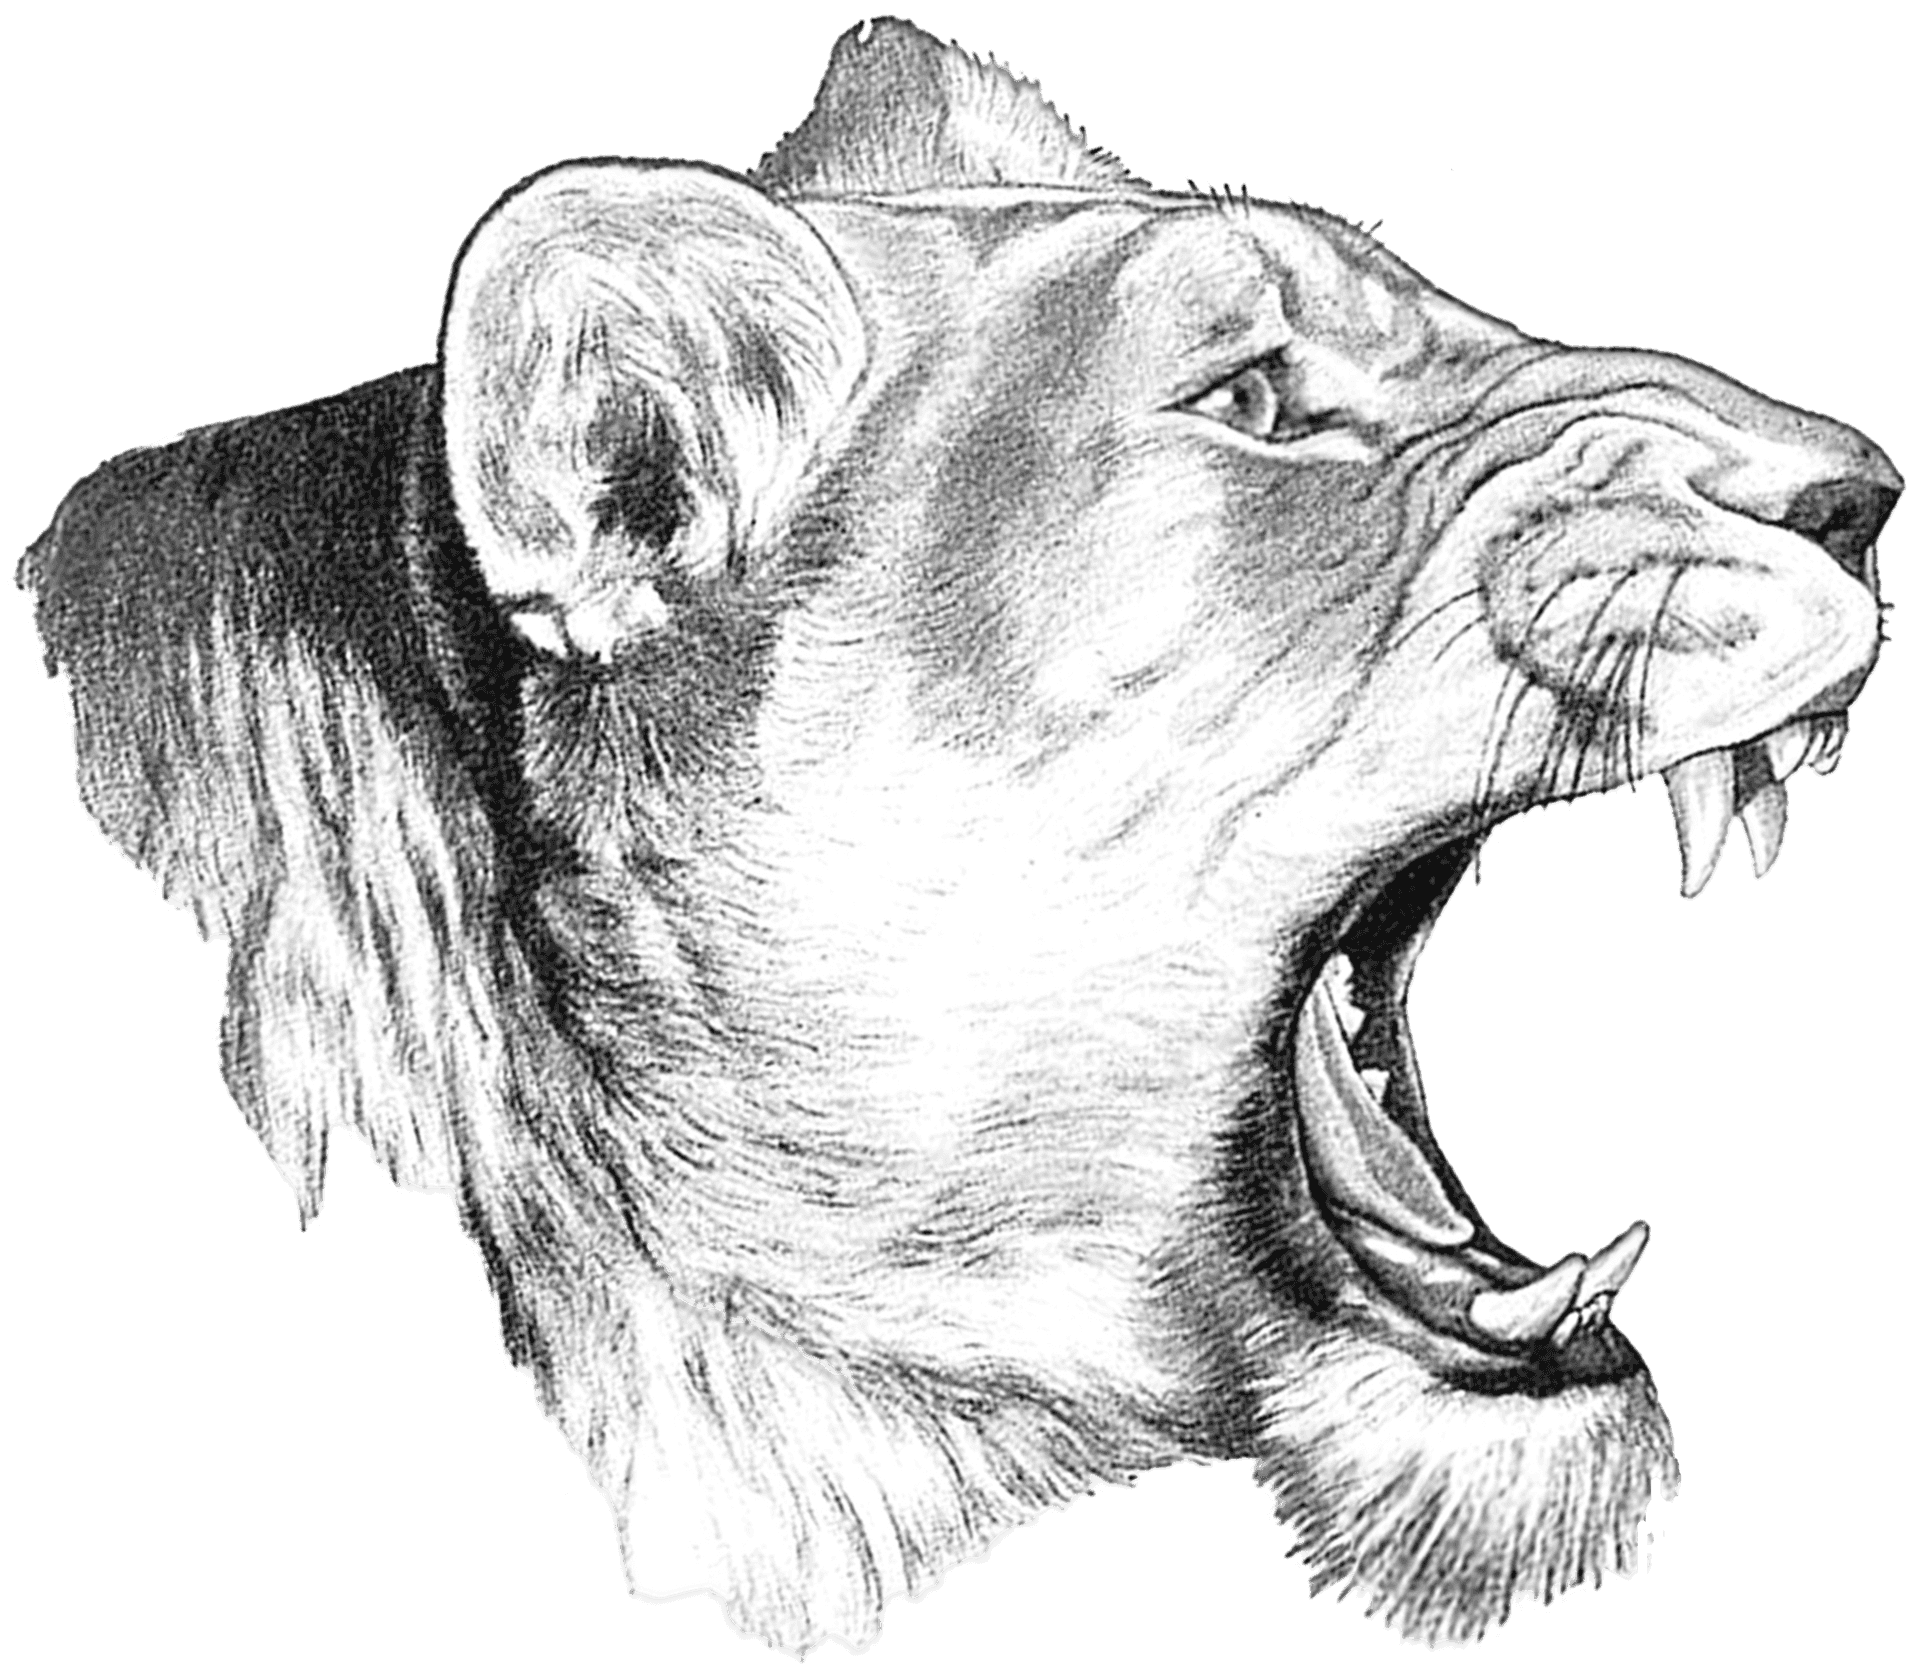 Roaring Lioness Sketch PNG image